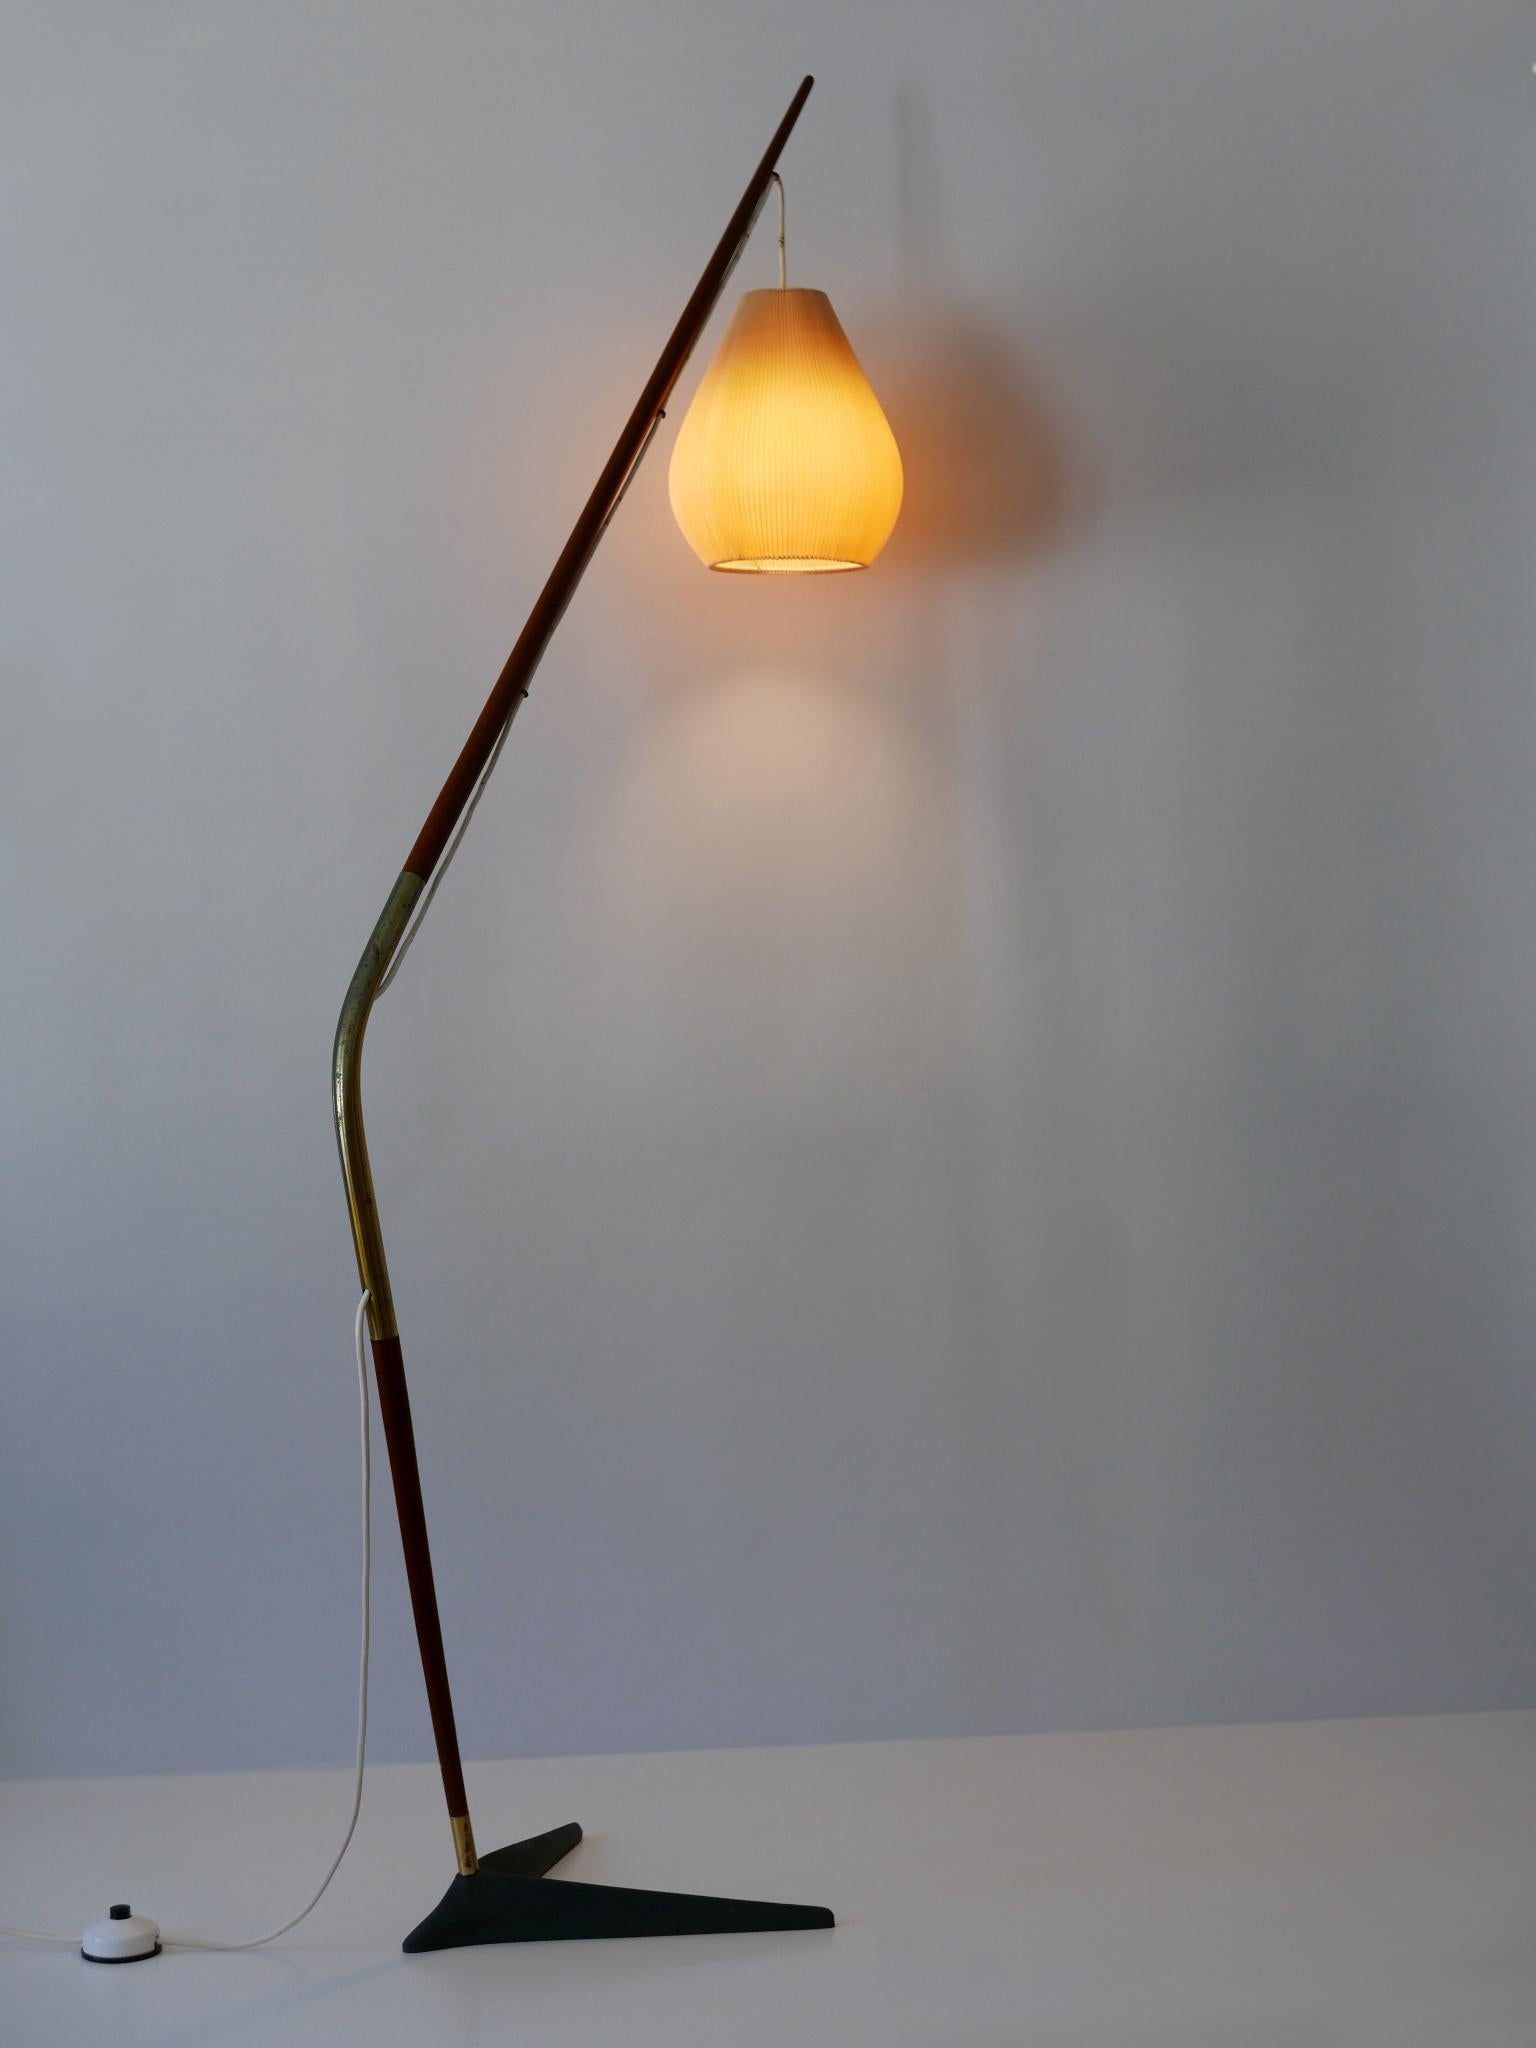 Exceptional 'Fishing Pole' Floor Lamp by Svend Aage Holm Sørensen Denmark 1950s For Sale 1